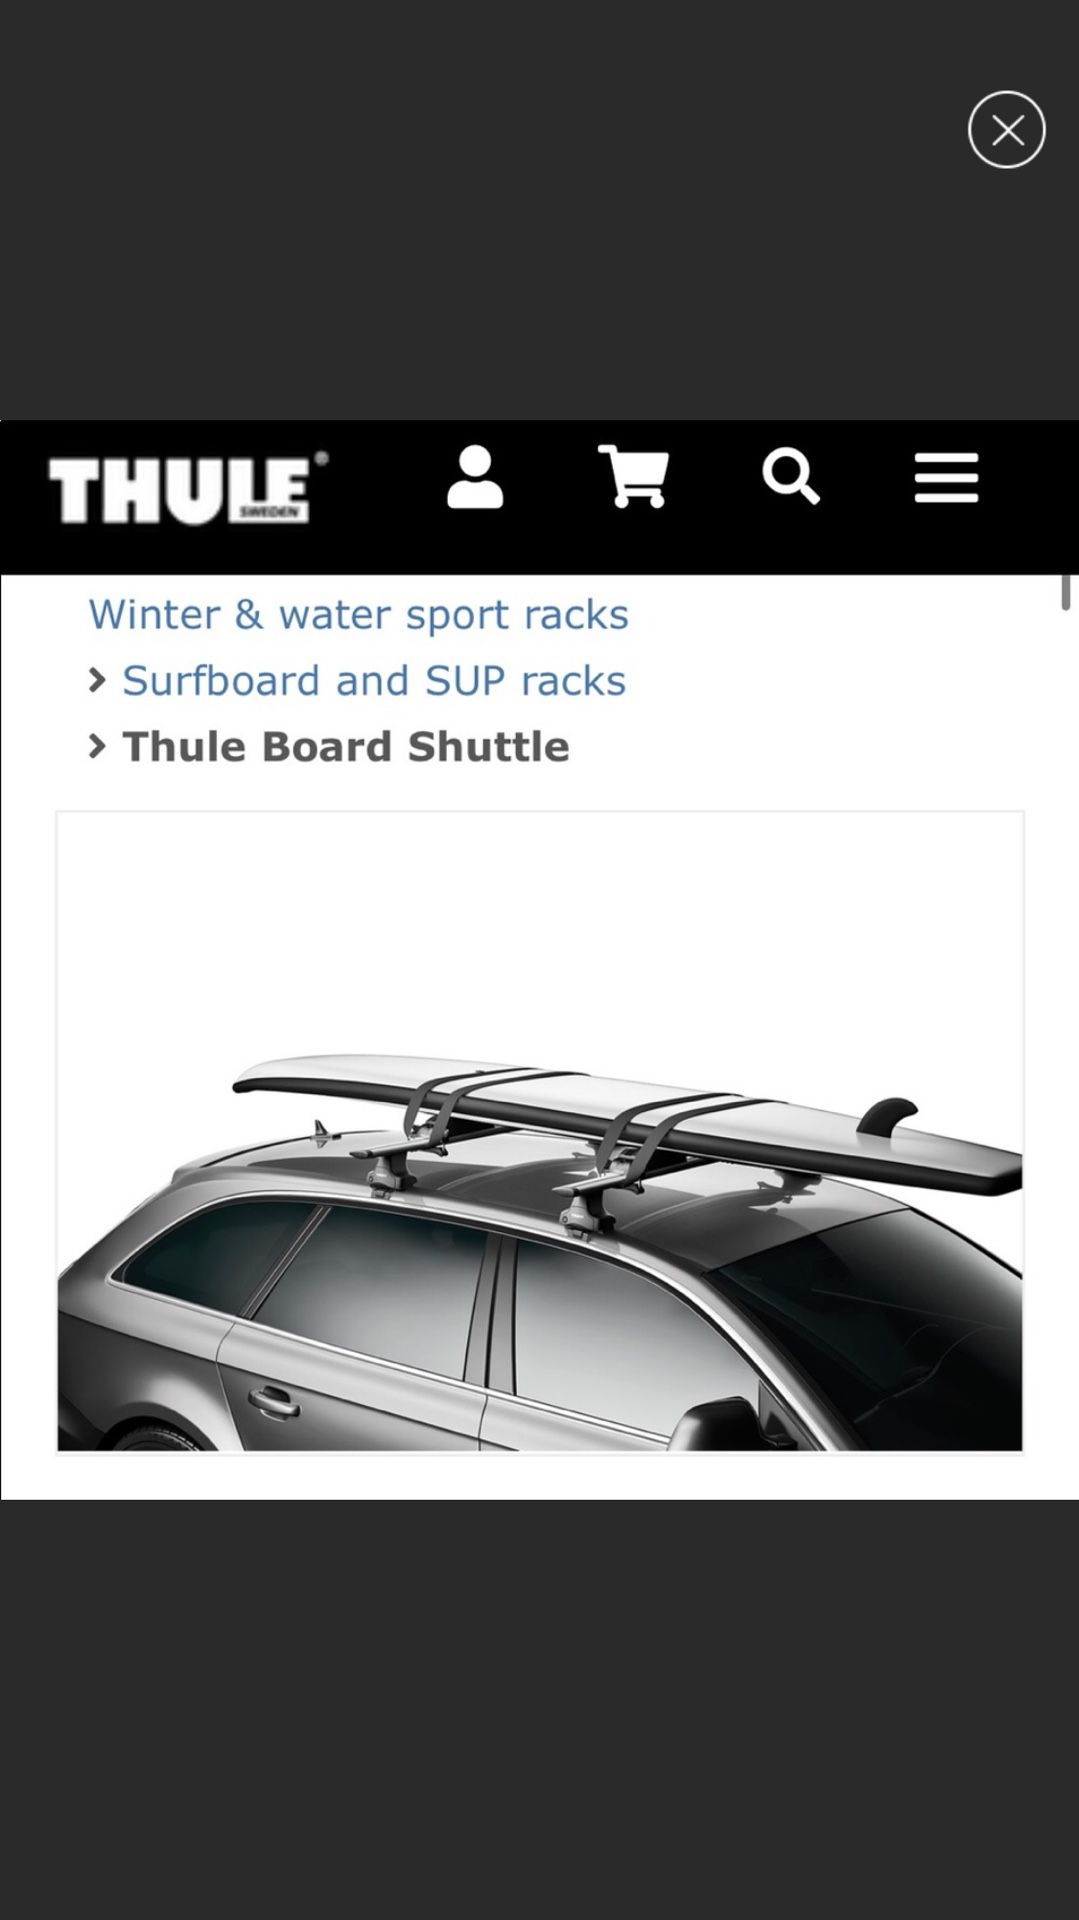 Thule Surfboard and SUP rack